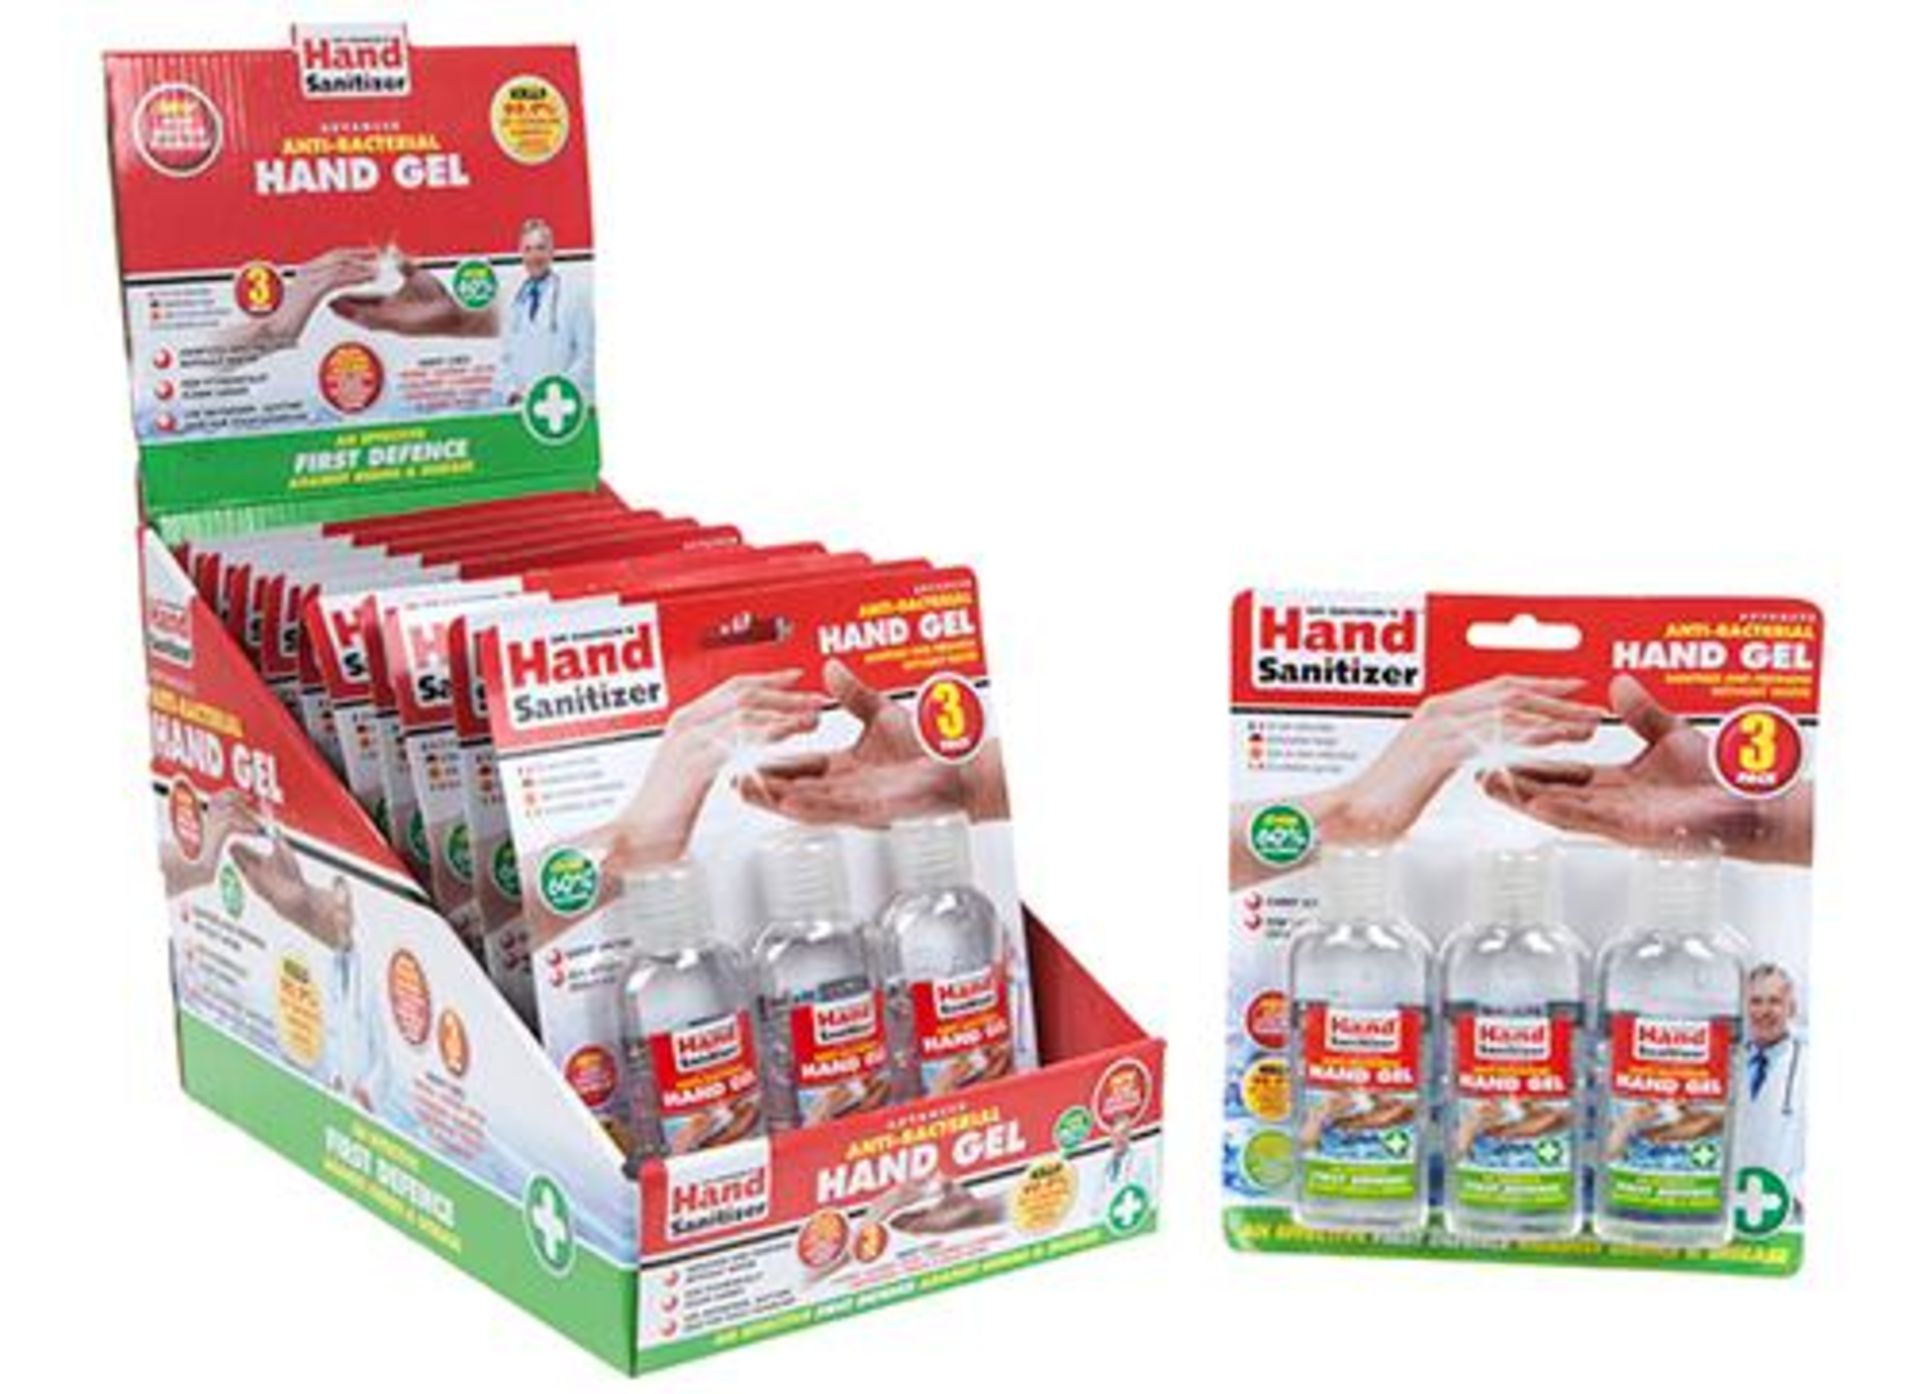 V *TRADE QTY* Brand New 3 Bottles of Antibacterial Hand Sanitiser X 5 YOUR BID PRICE TO BE